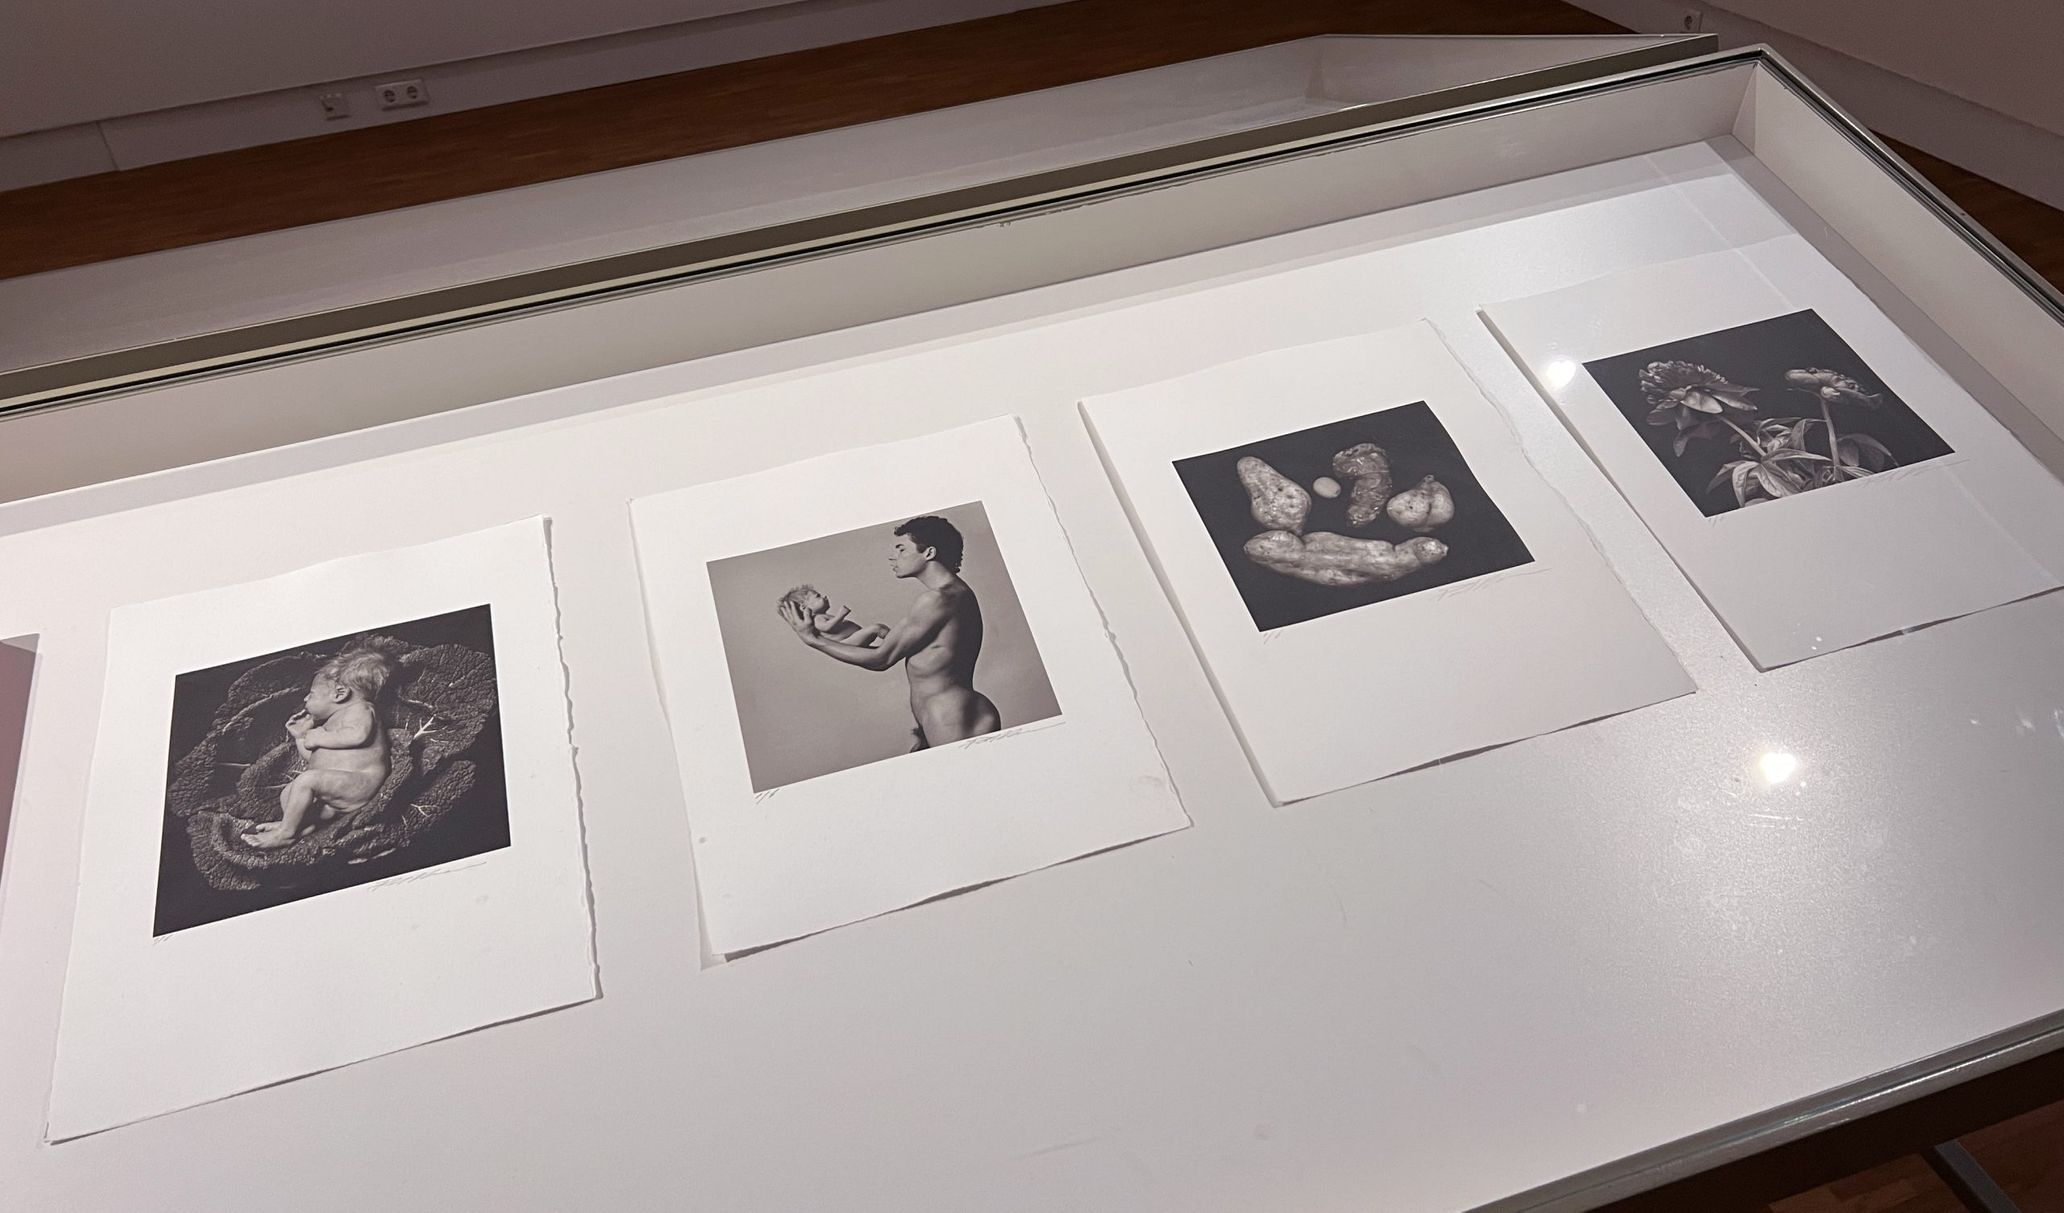 In 2021, shortly before his death, Blanca collaborated with leading Dutch portrait photographer Koos Breukel to produce twelve platinum-palladium prints of his most famous works. It is hoped that these will lead to a reappraisal of Blanca.